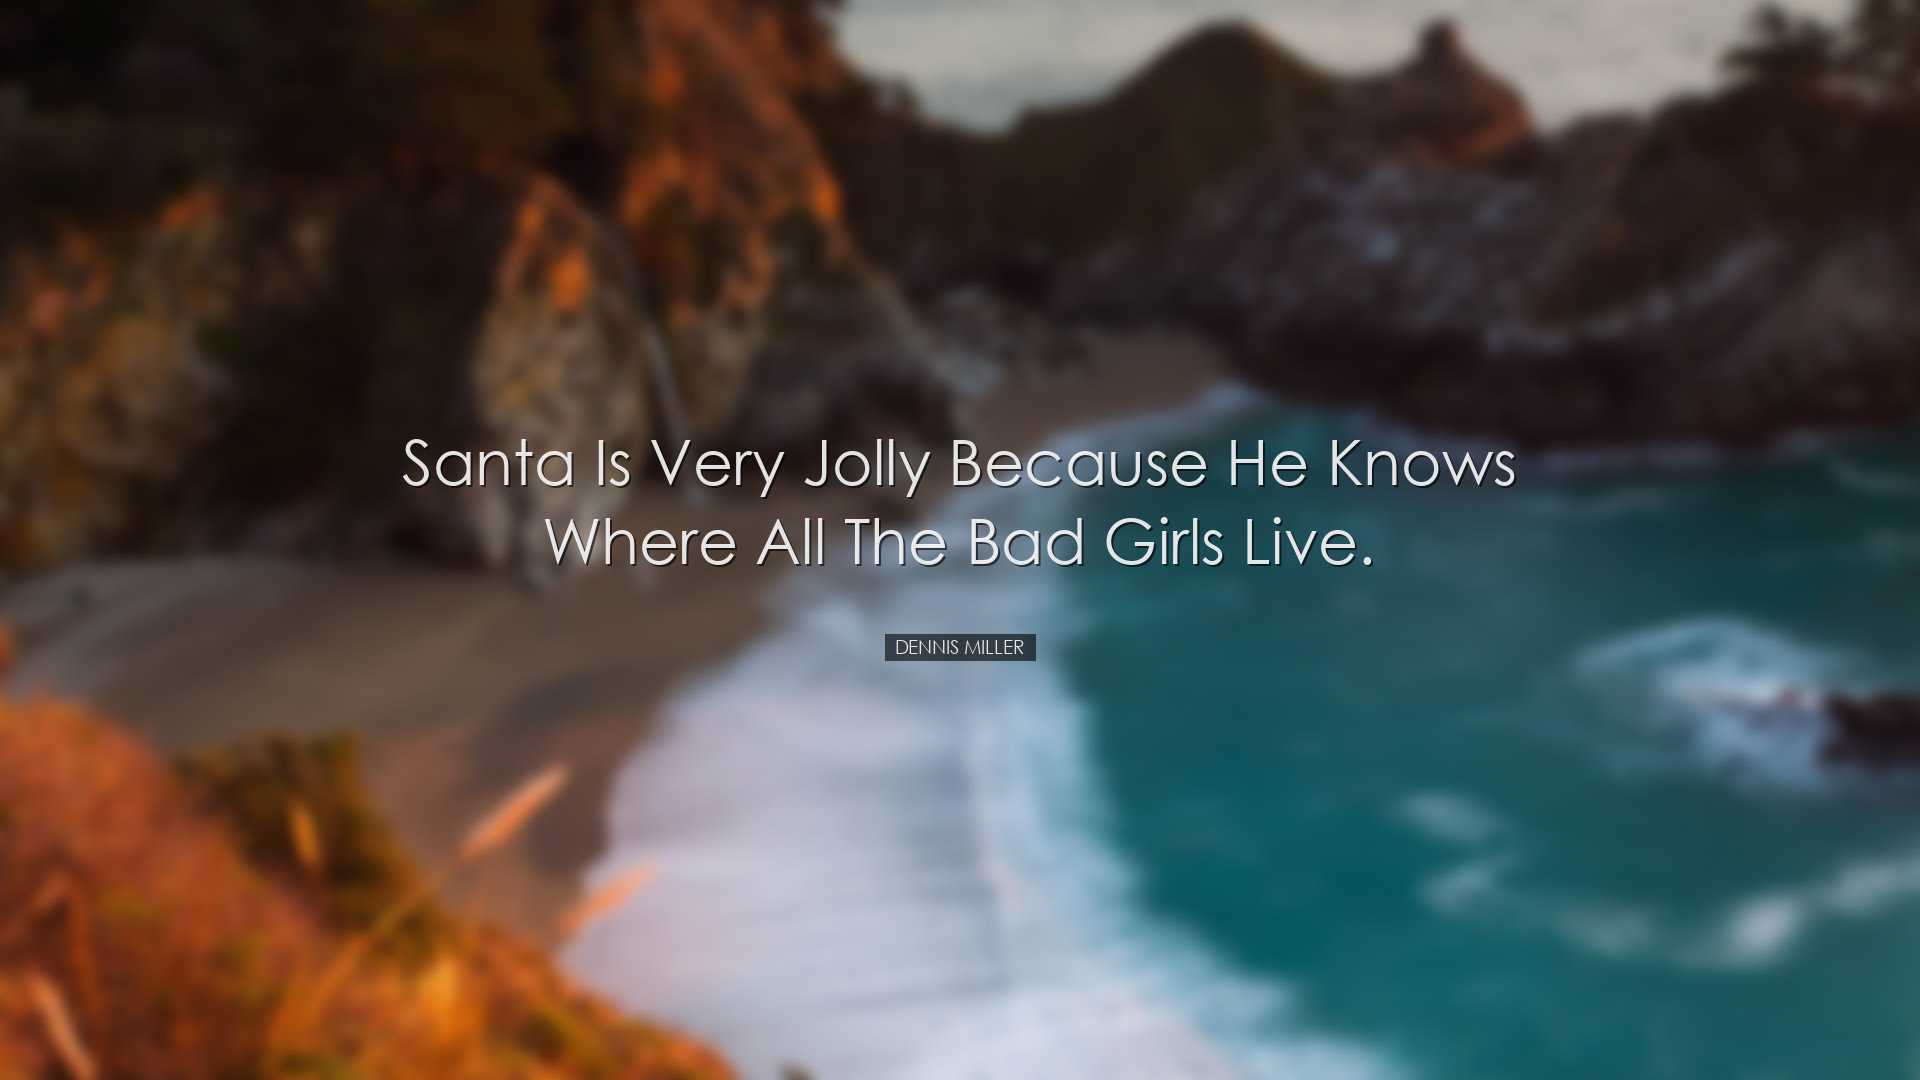 Santa is very jolly because he knows where all the bad girls live.